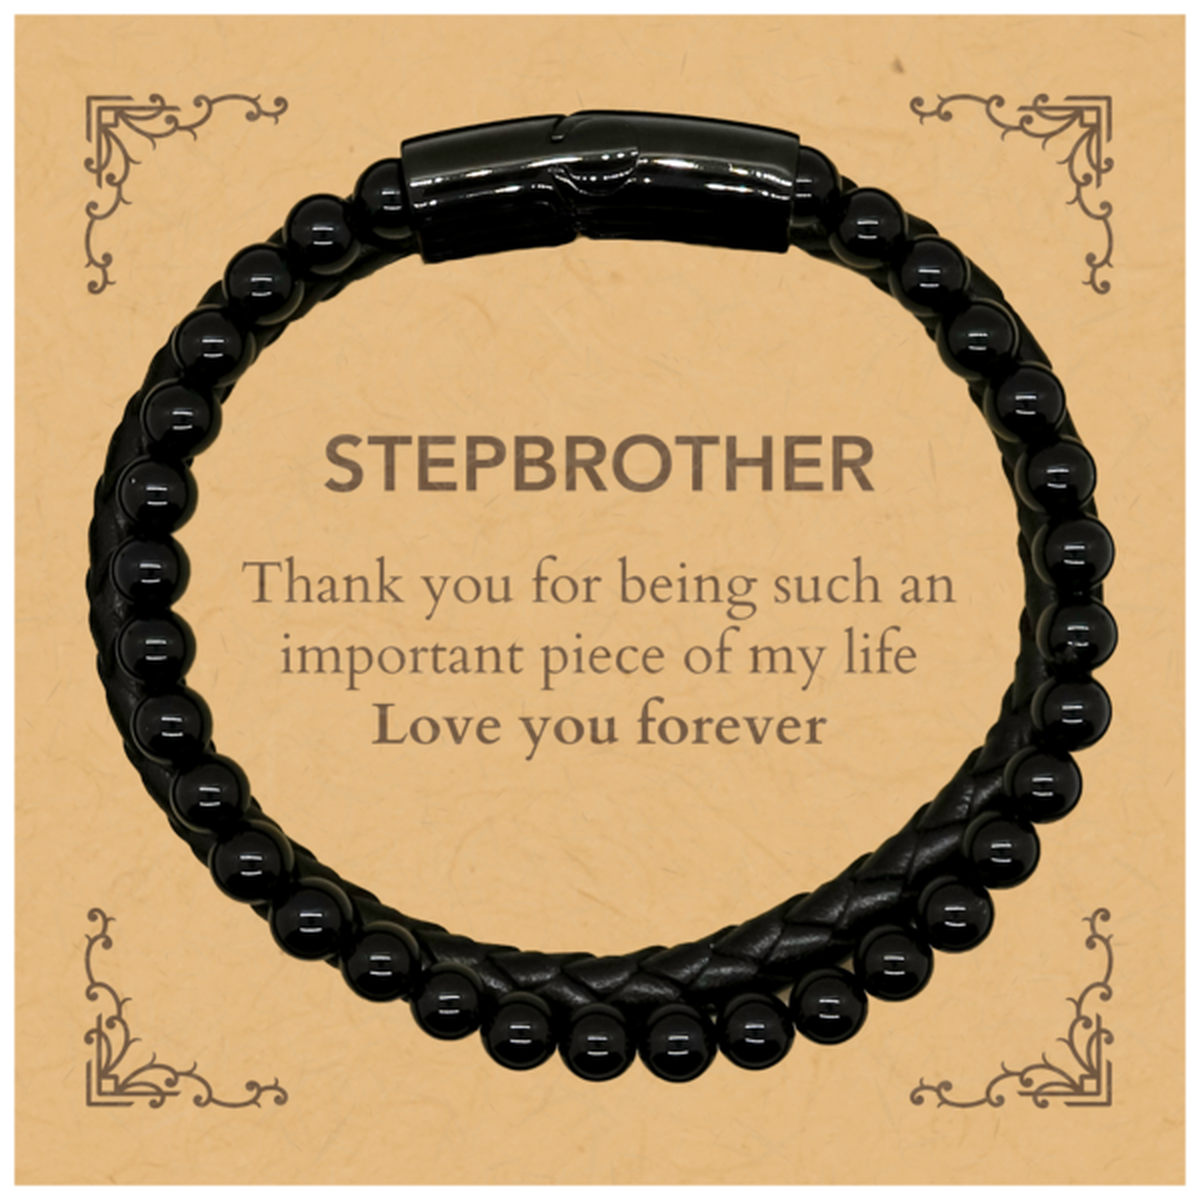 Appropriate Stepbrother Stone Leather Bracelets Epic Birthday Gifts for Stepbrother Thank you for being such an important piece of my life Stepbrother Christmas Mothers Fathers Day